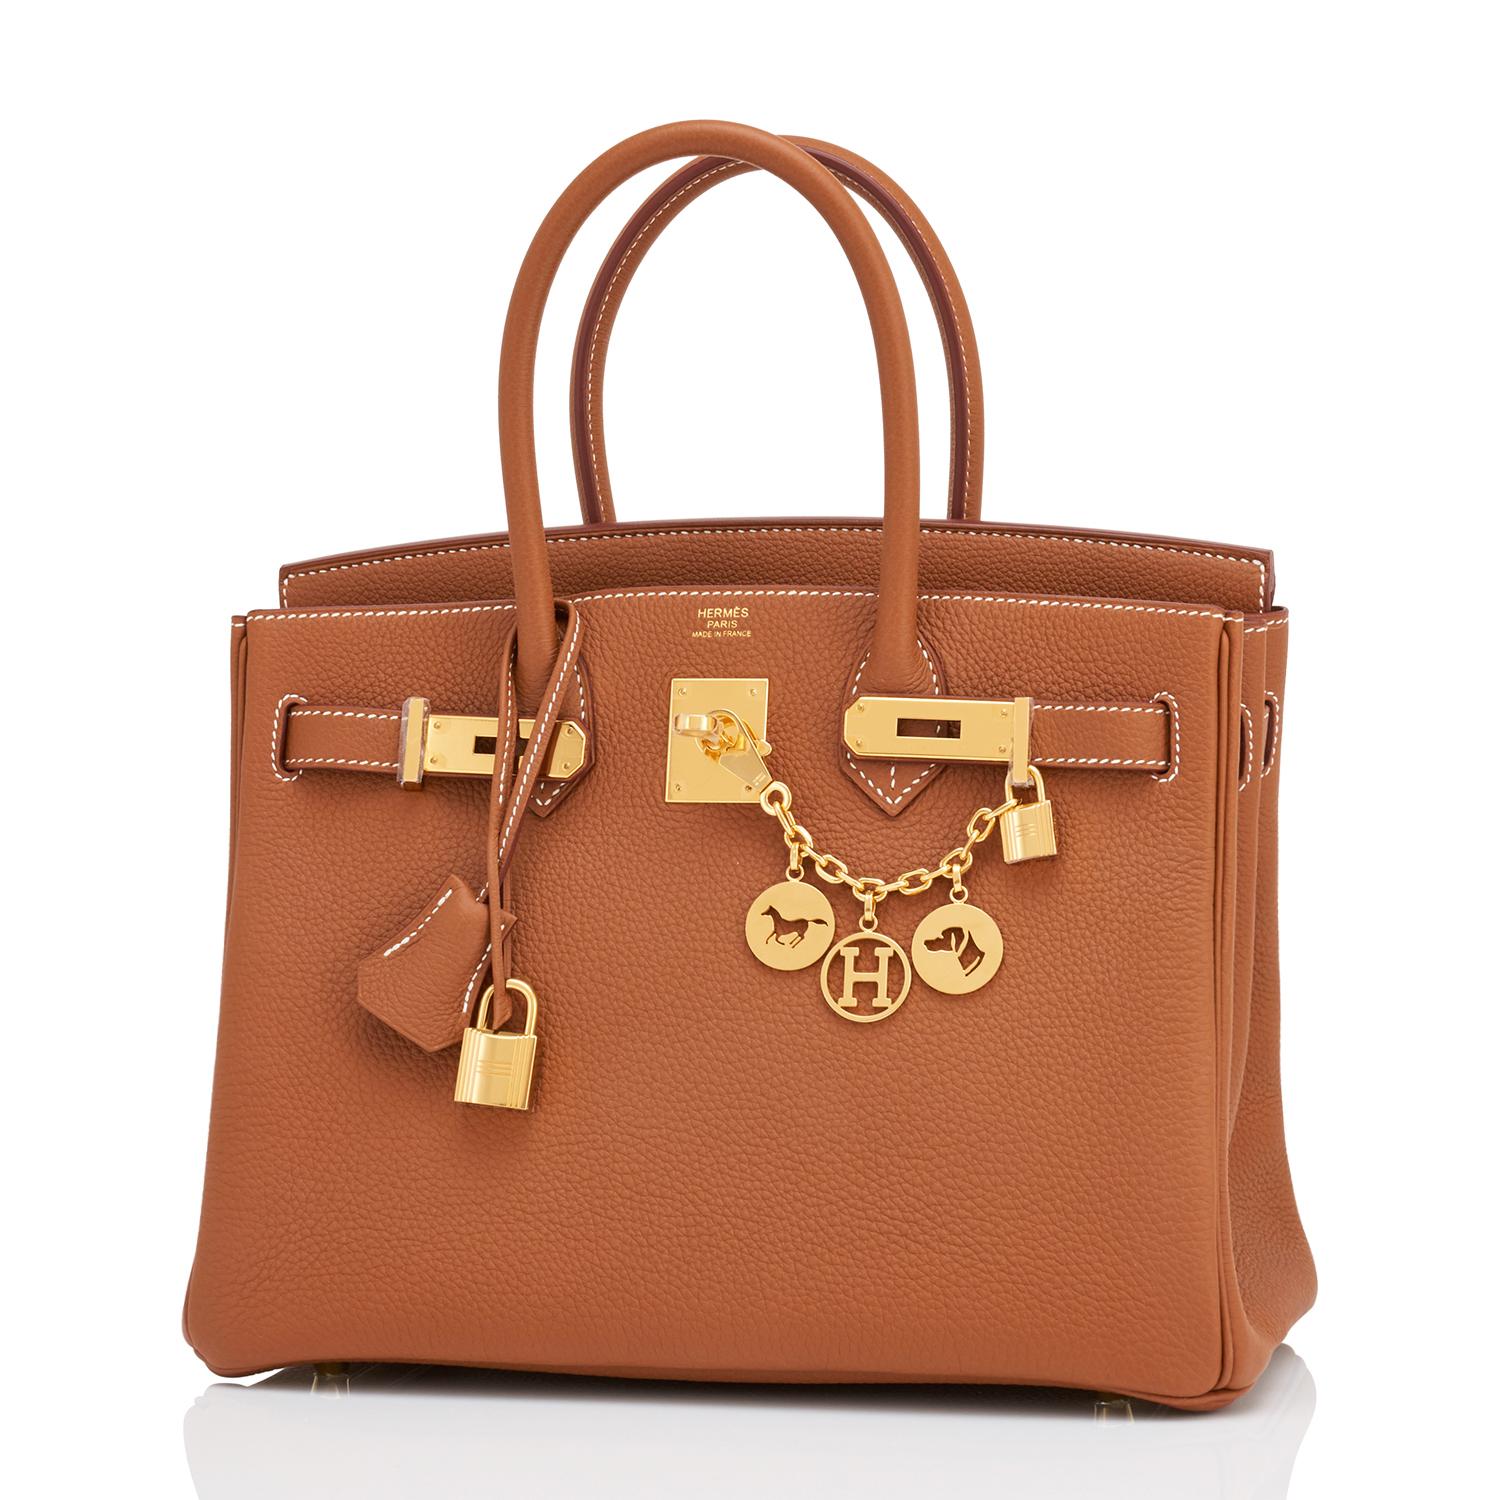 WIRE PRICE ONLY
Hermes Birkin 30cm Gold Tan Togo Gold Hardware Bag U Stamp, 2022
Don't miss this sublime combination- the ultimate holiday gift!
Just purchased from Hermes store- bag bears new 2022 interior U Stamp!
Brand New in Box. Store Fresh.